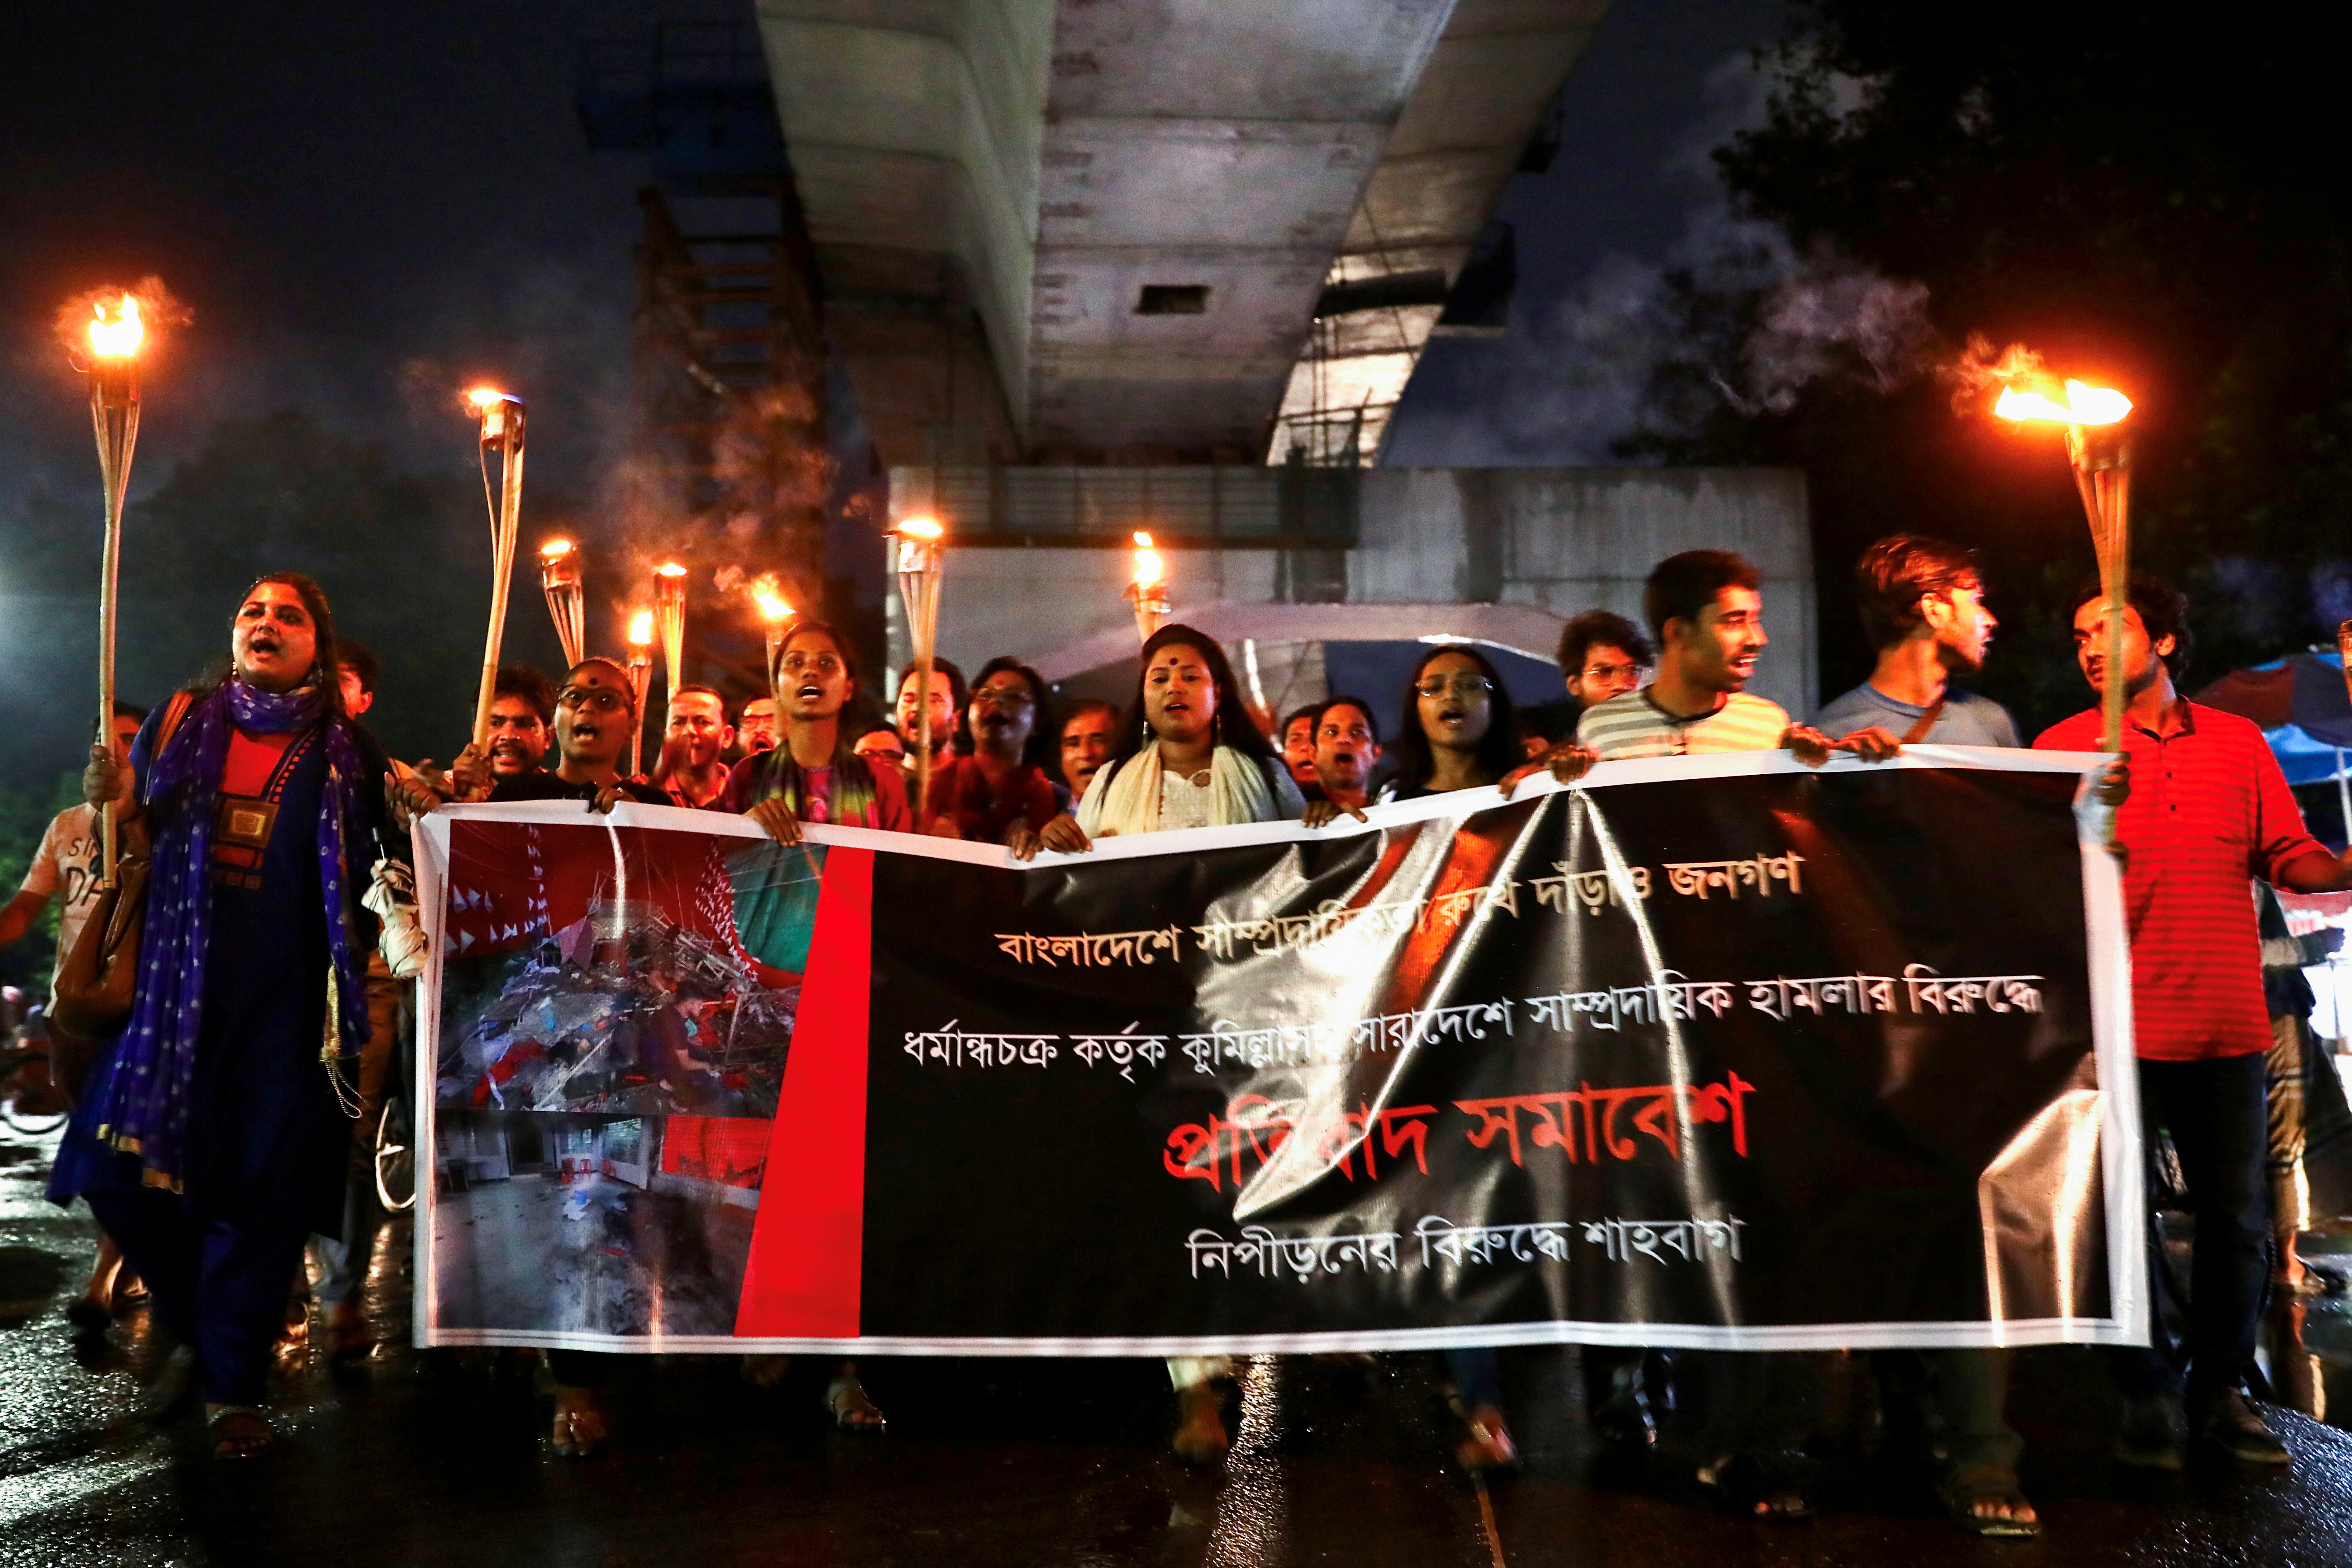 Protest demanding justice for the violence against Hindu communities during Durga Puja festival in Dhaka